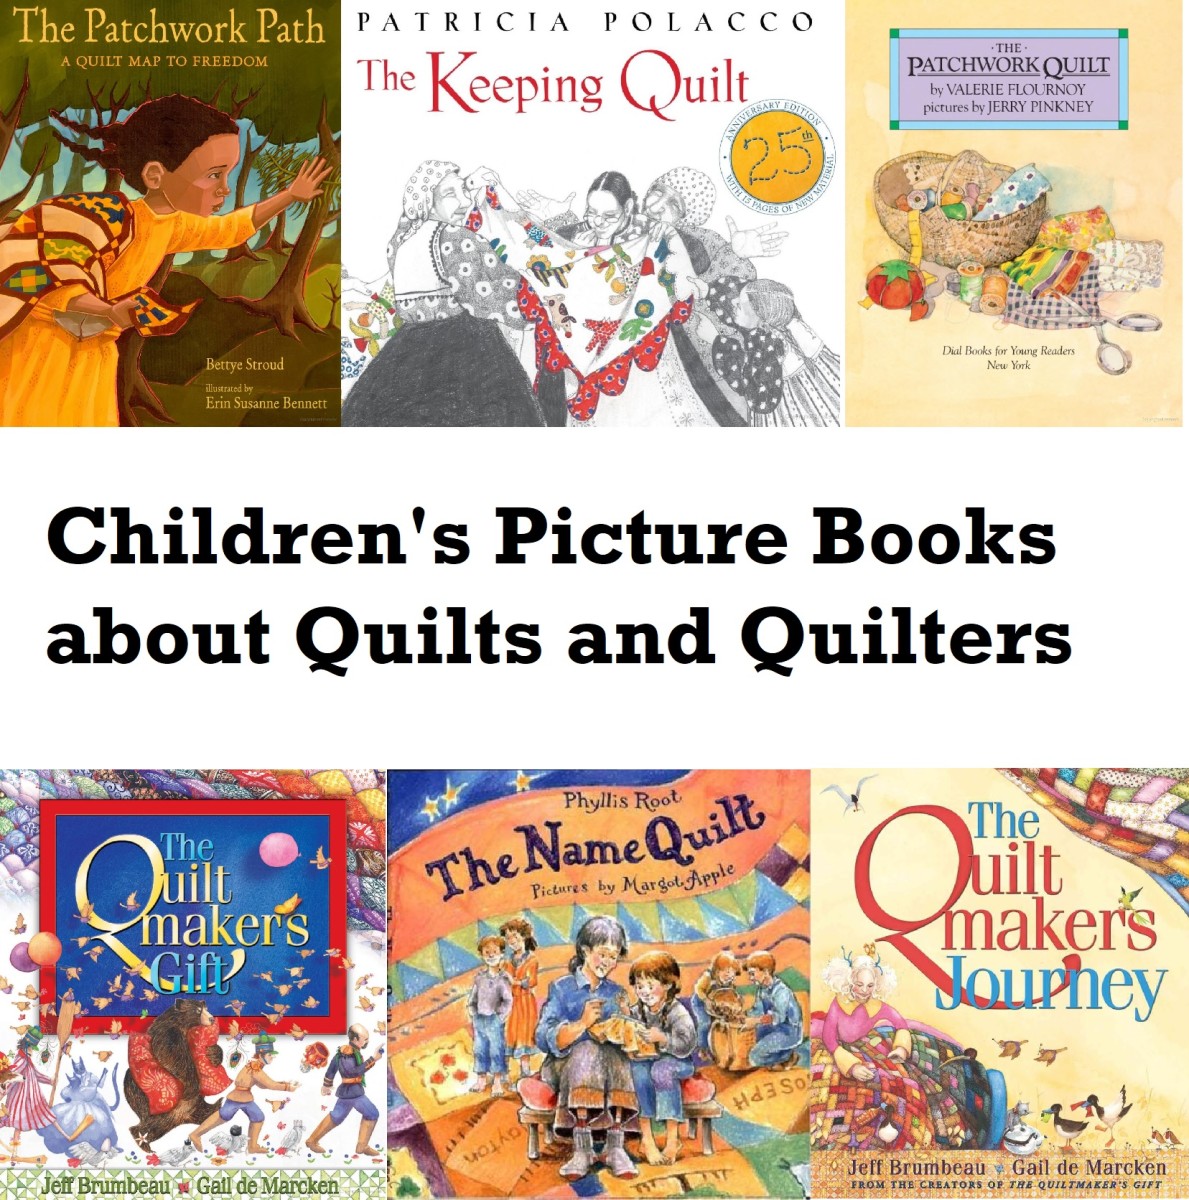 Children's Books About Quilts and Quilting